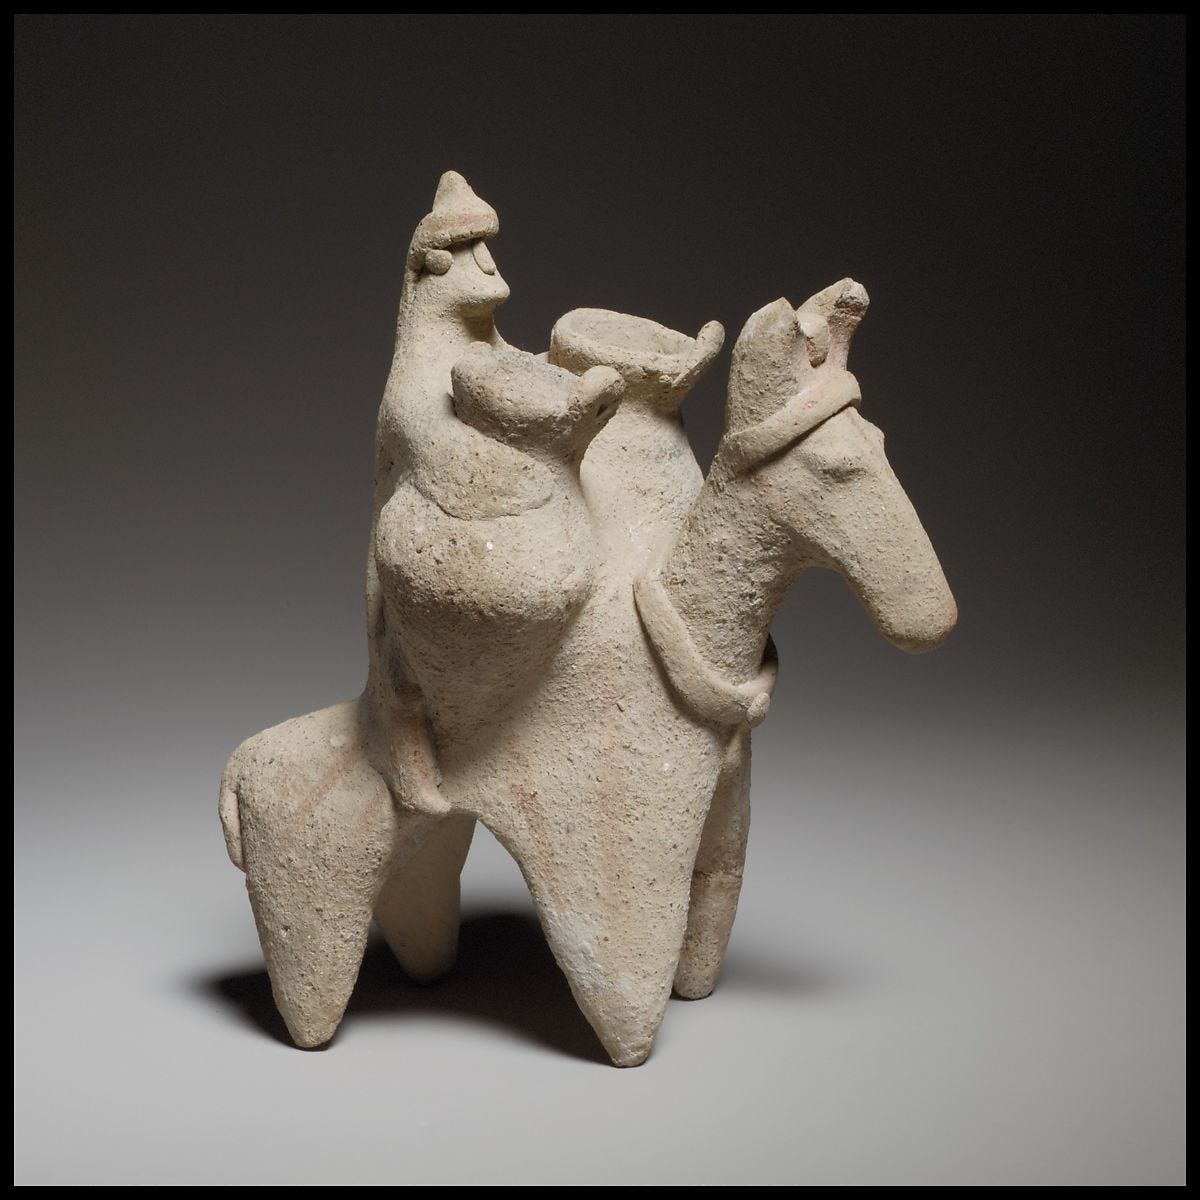 Terracotta statuette of a man riding a donkey, Terracotta, Cypriot 